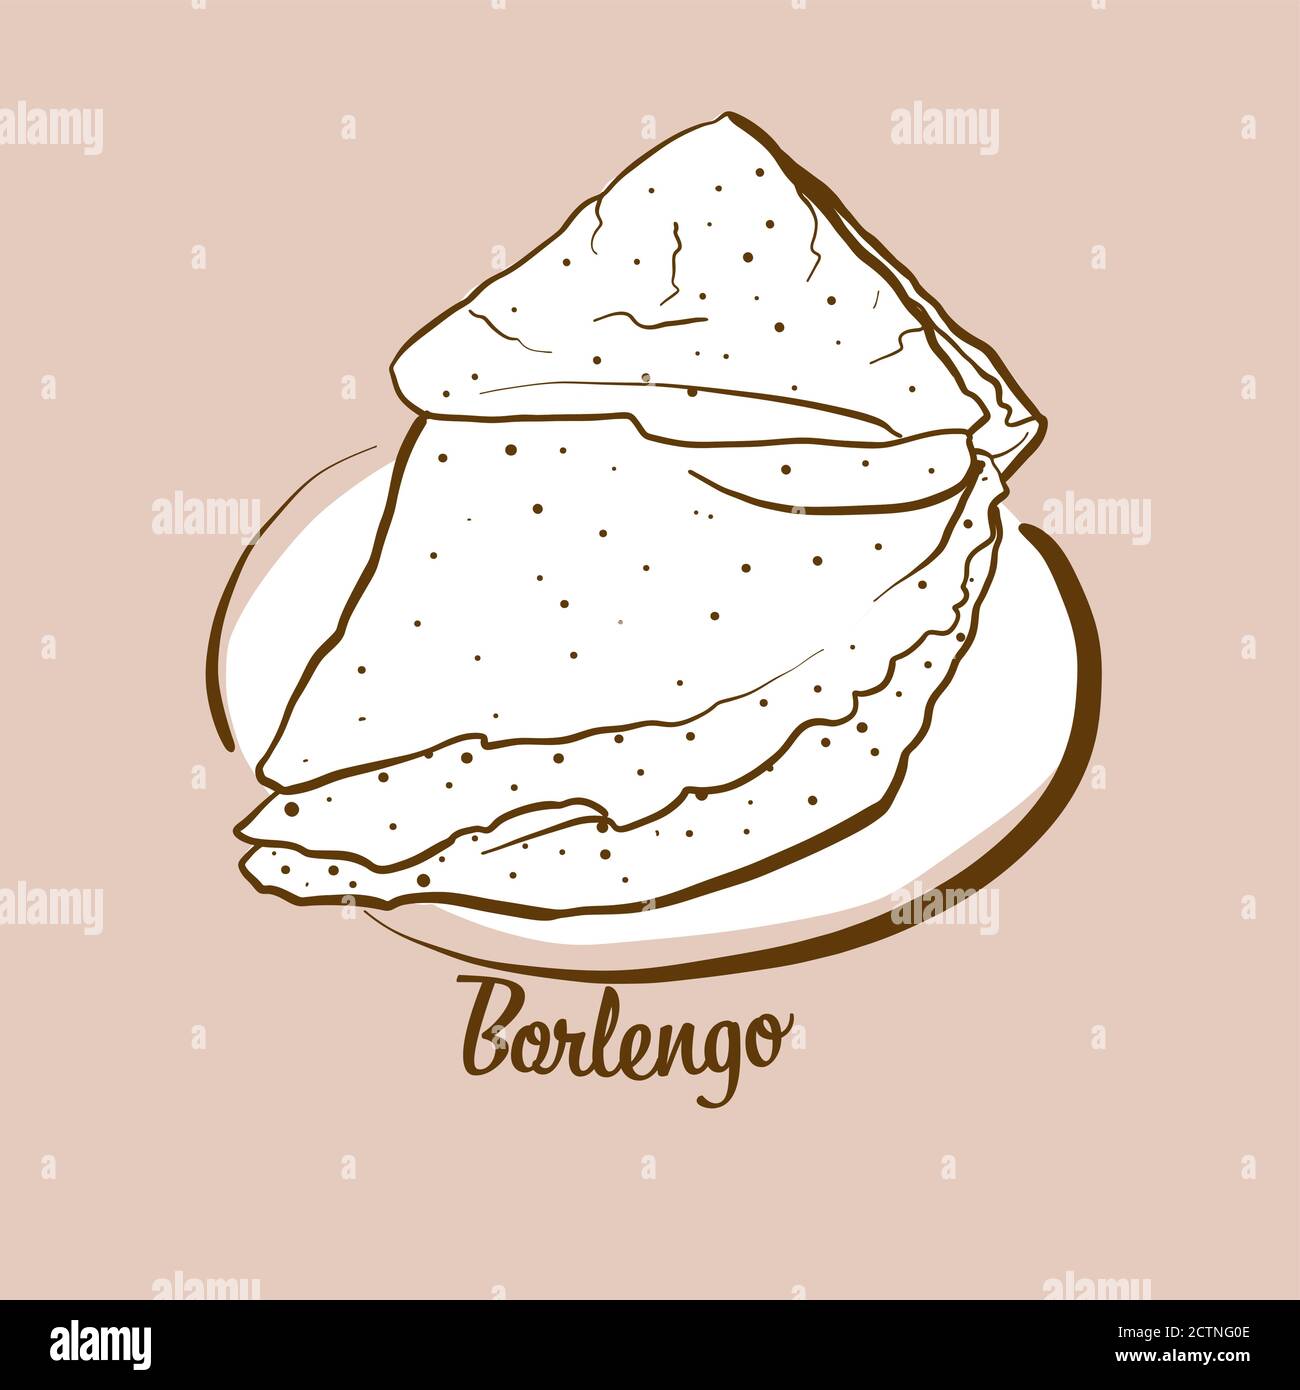 Hand-drawn Borlengo bread illustration. Pancake, usually known in Italy. Vector drawing series. Stock Vector